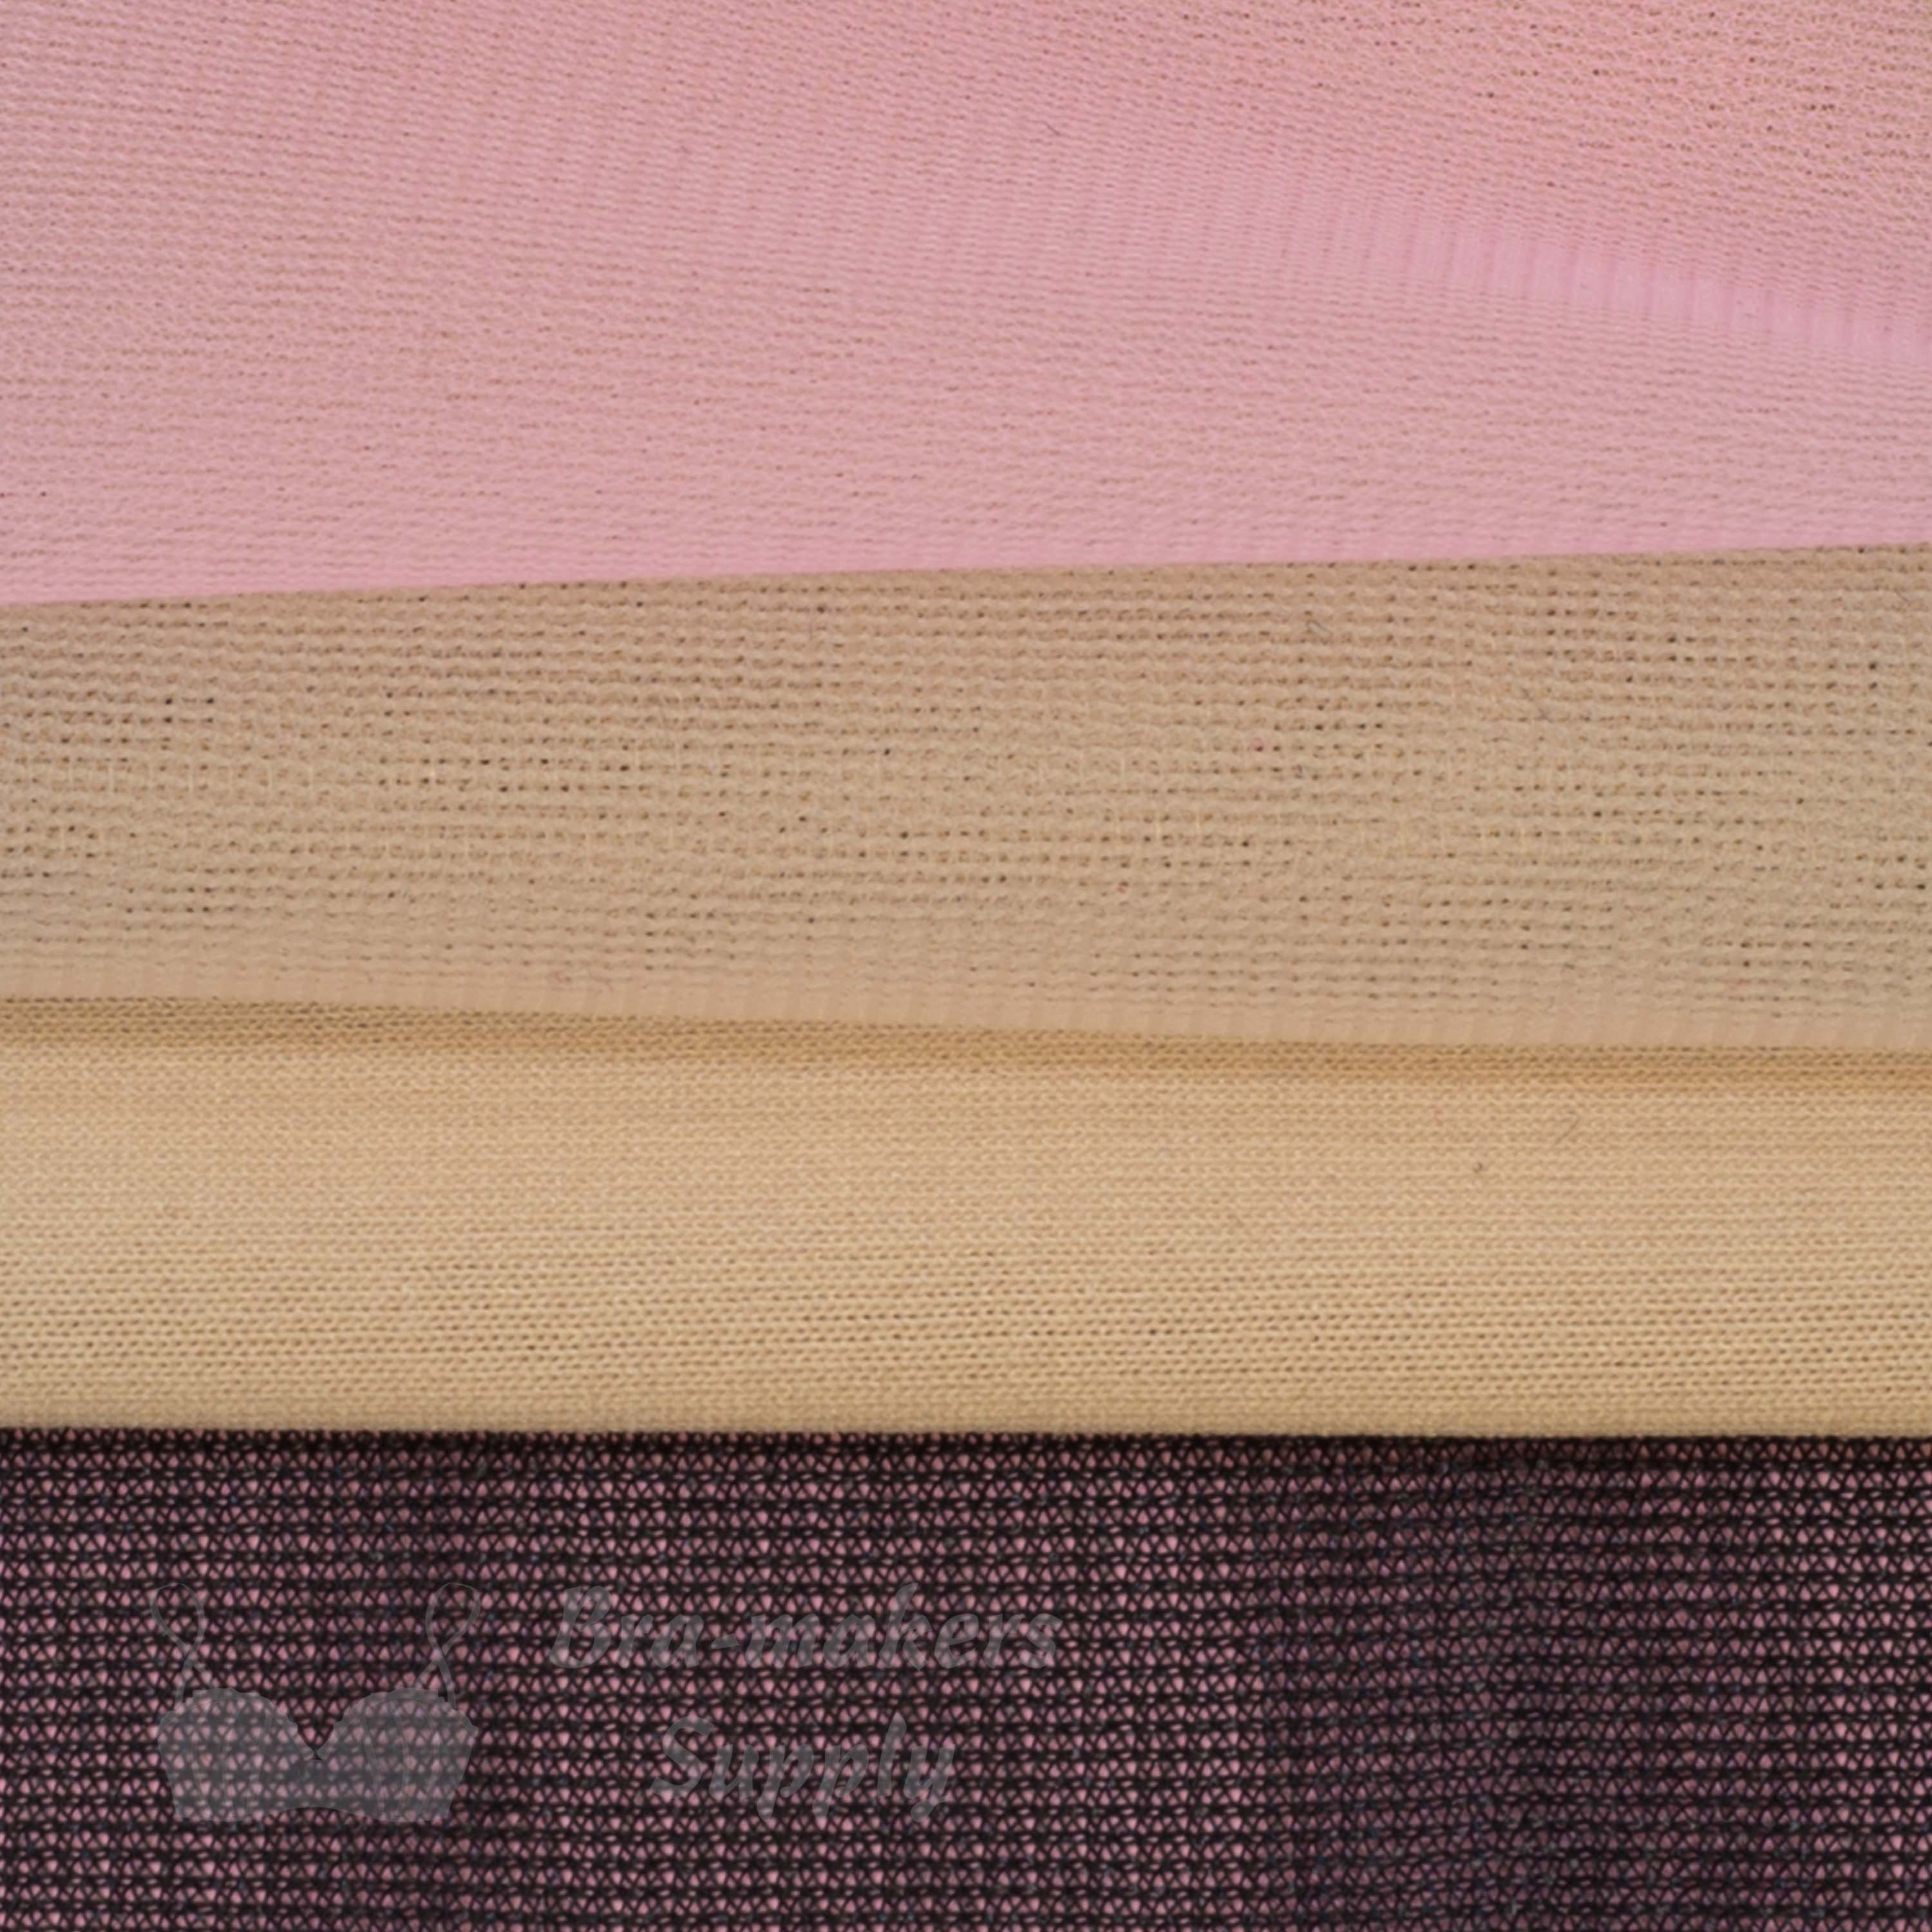 linings fusibles sampler pack FL-LINING from Bra-Makers Supply